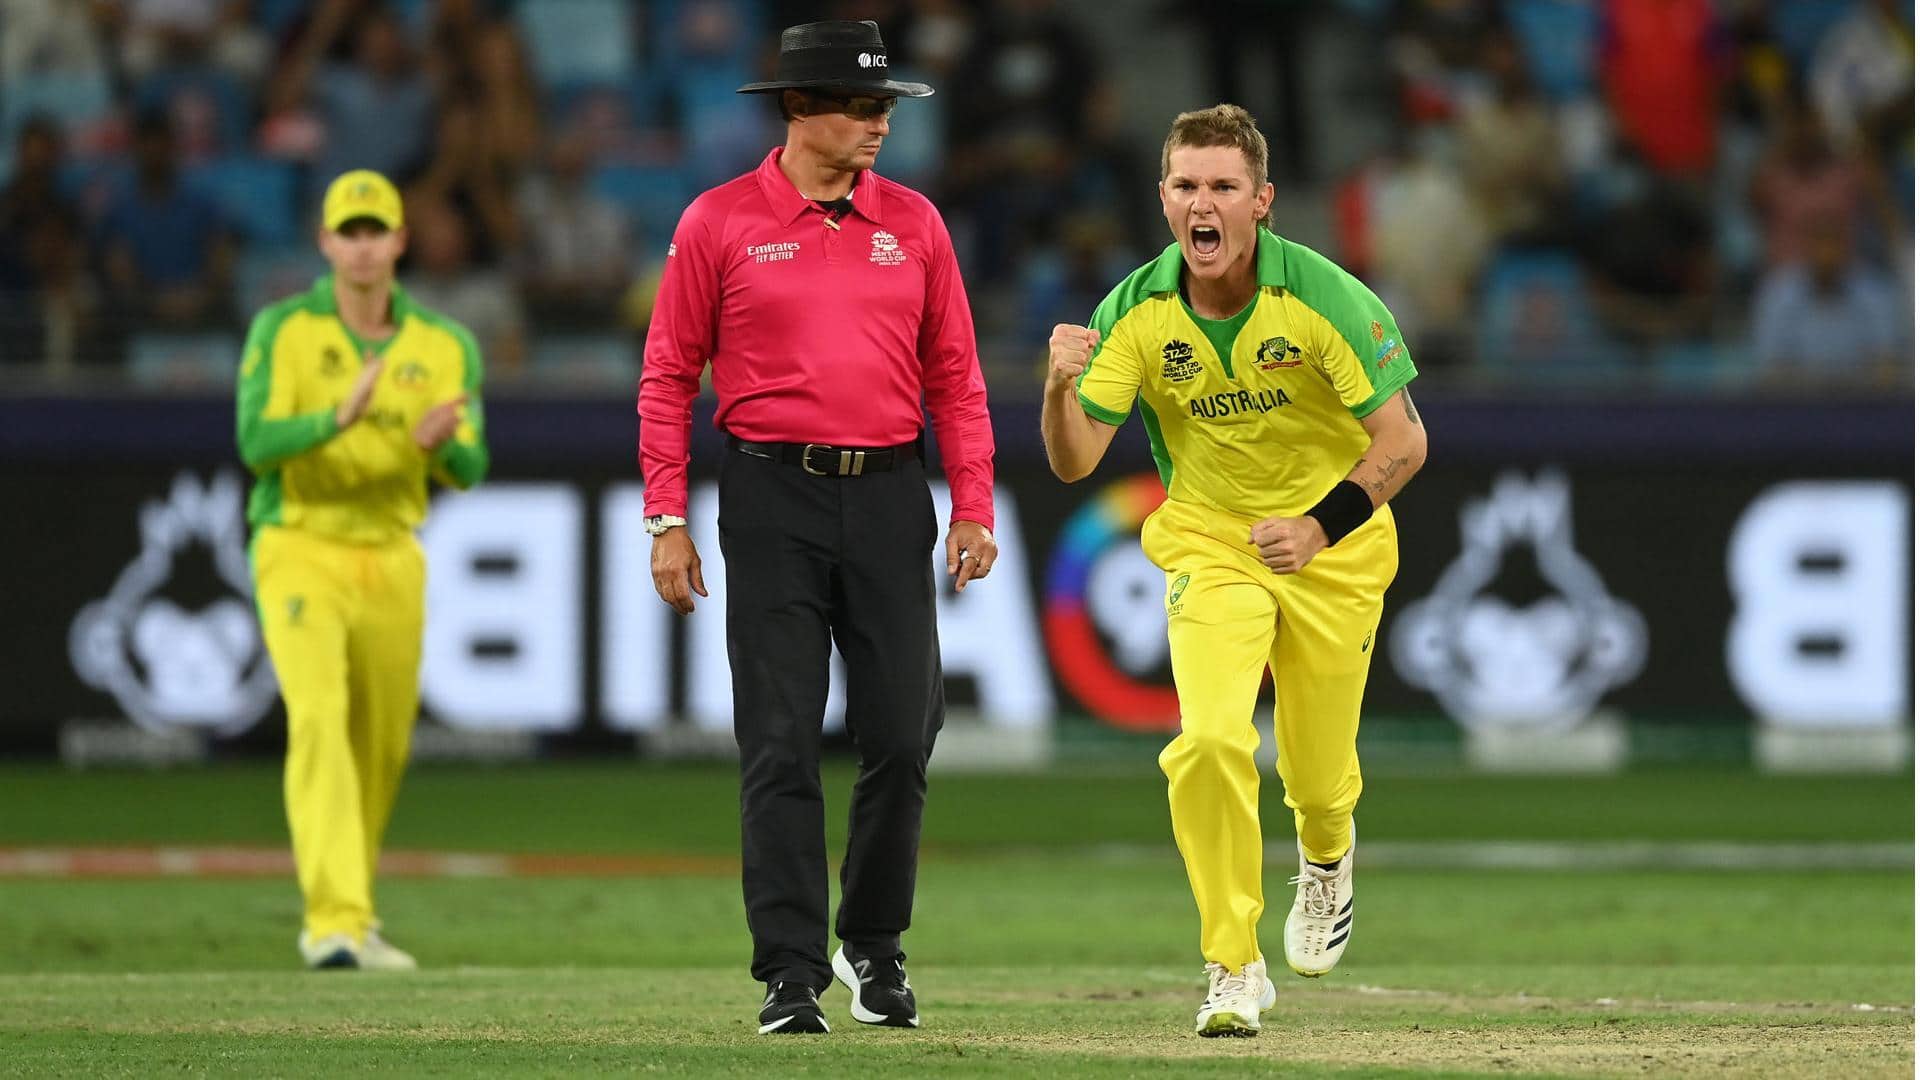 Adam Zampa becomes third Australian spinner with a WC four-fer